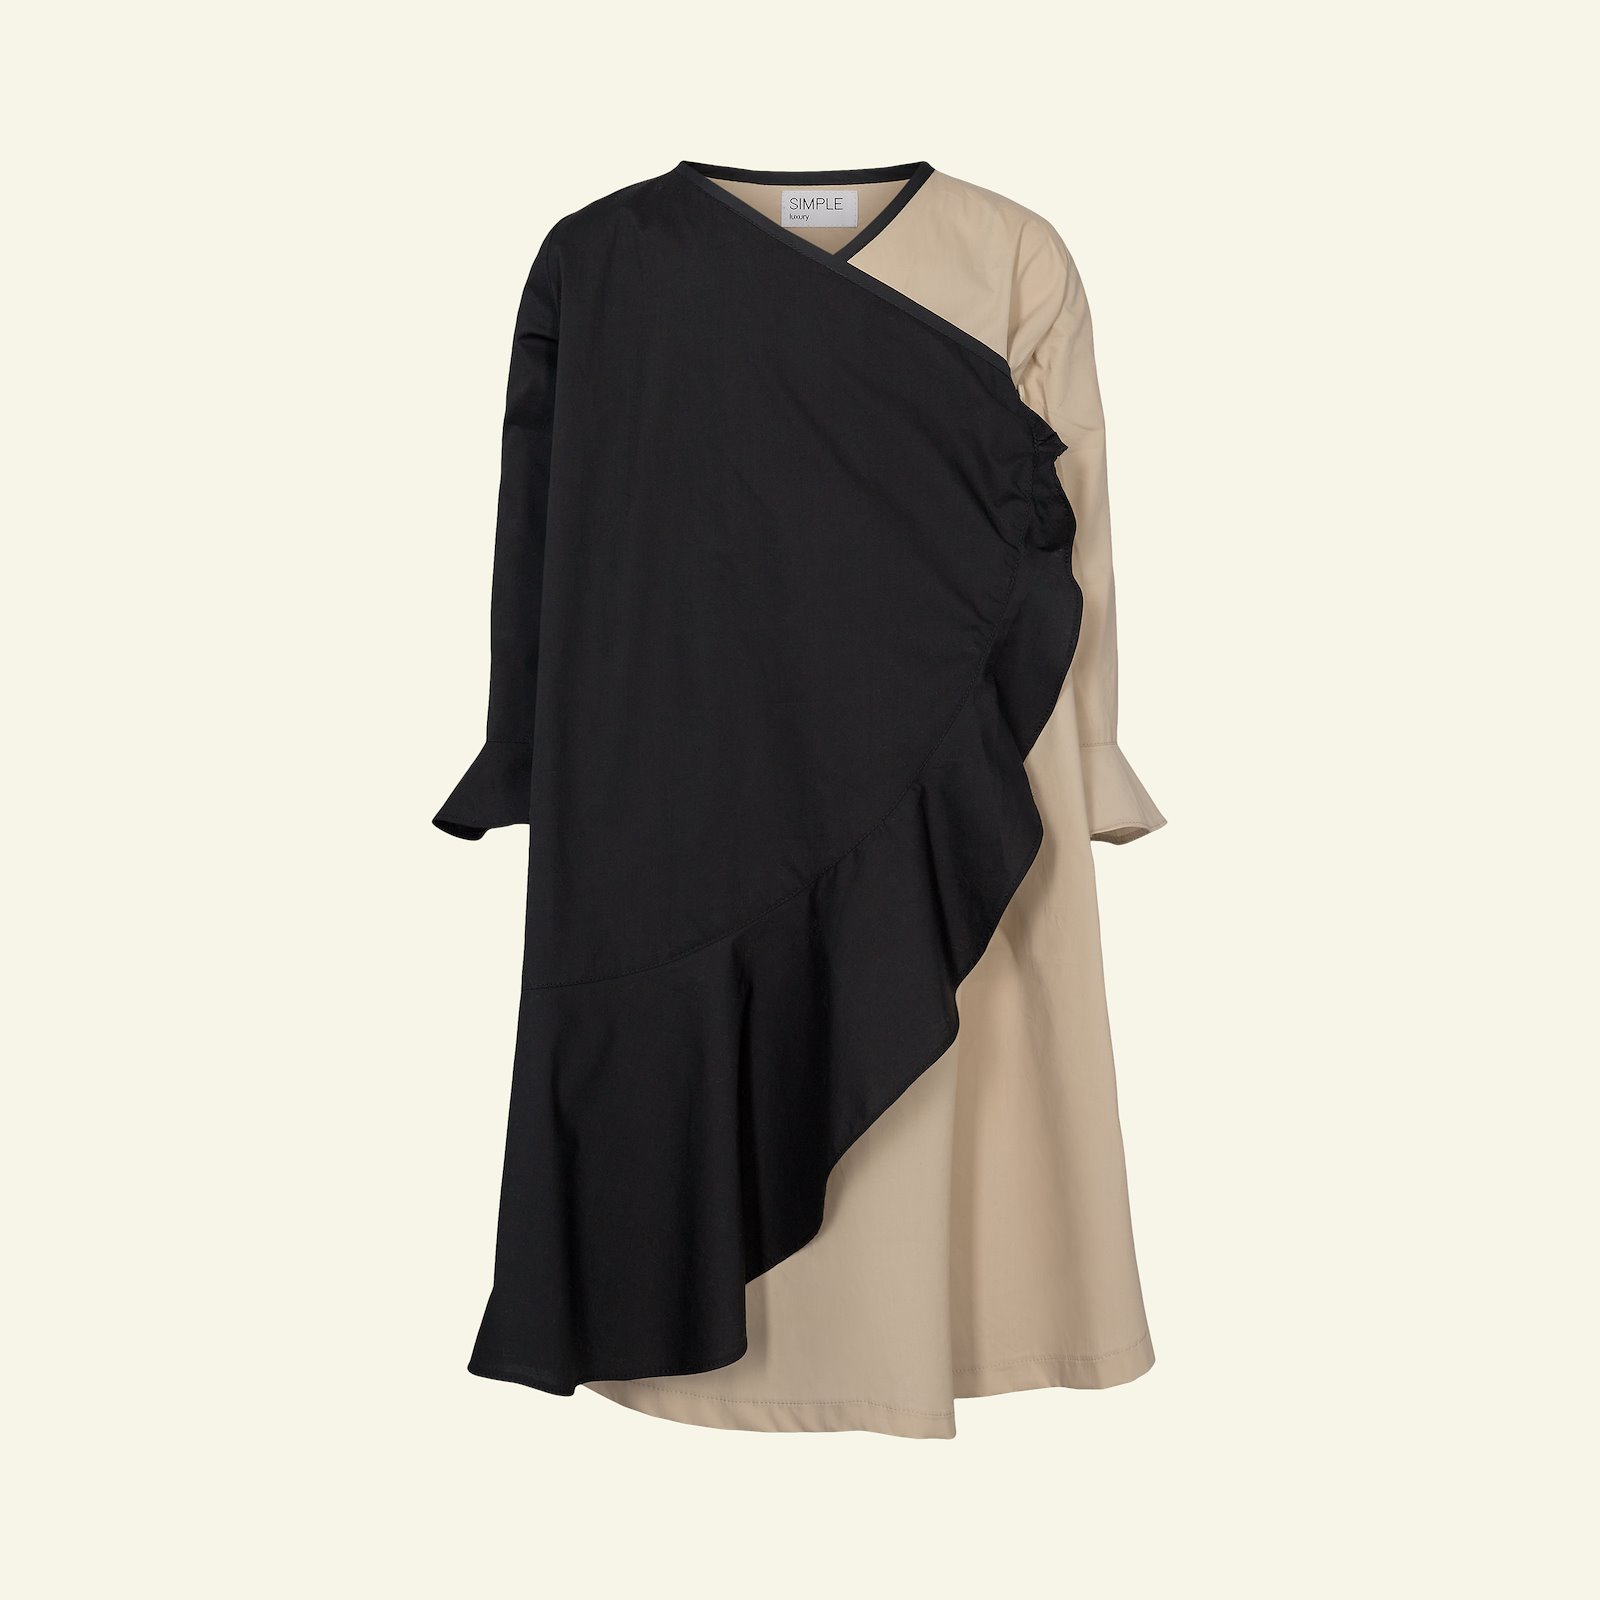 Dress und blouse with flounce, 134/9y p63066_540110_510112_64080_24865_sskit